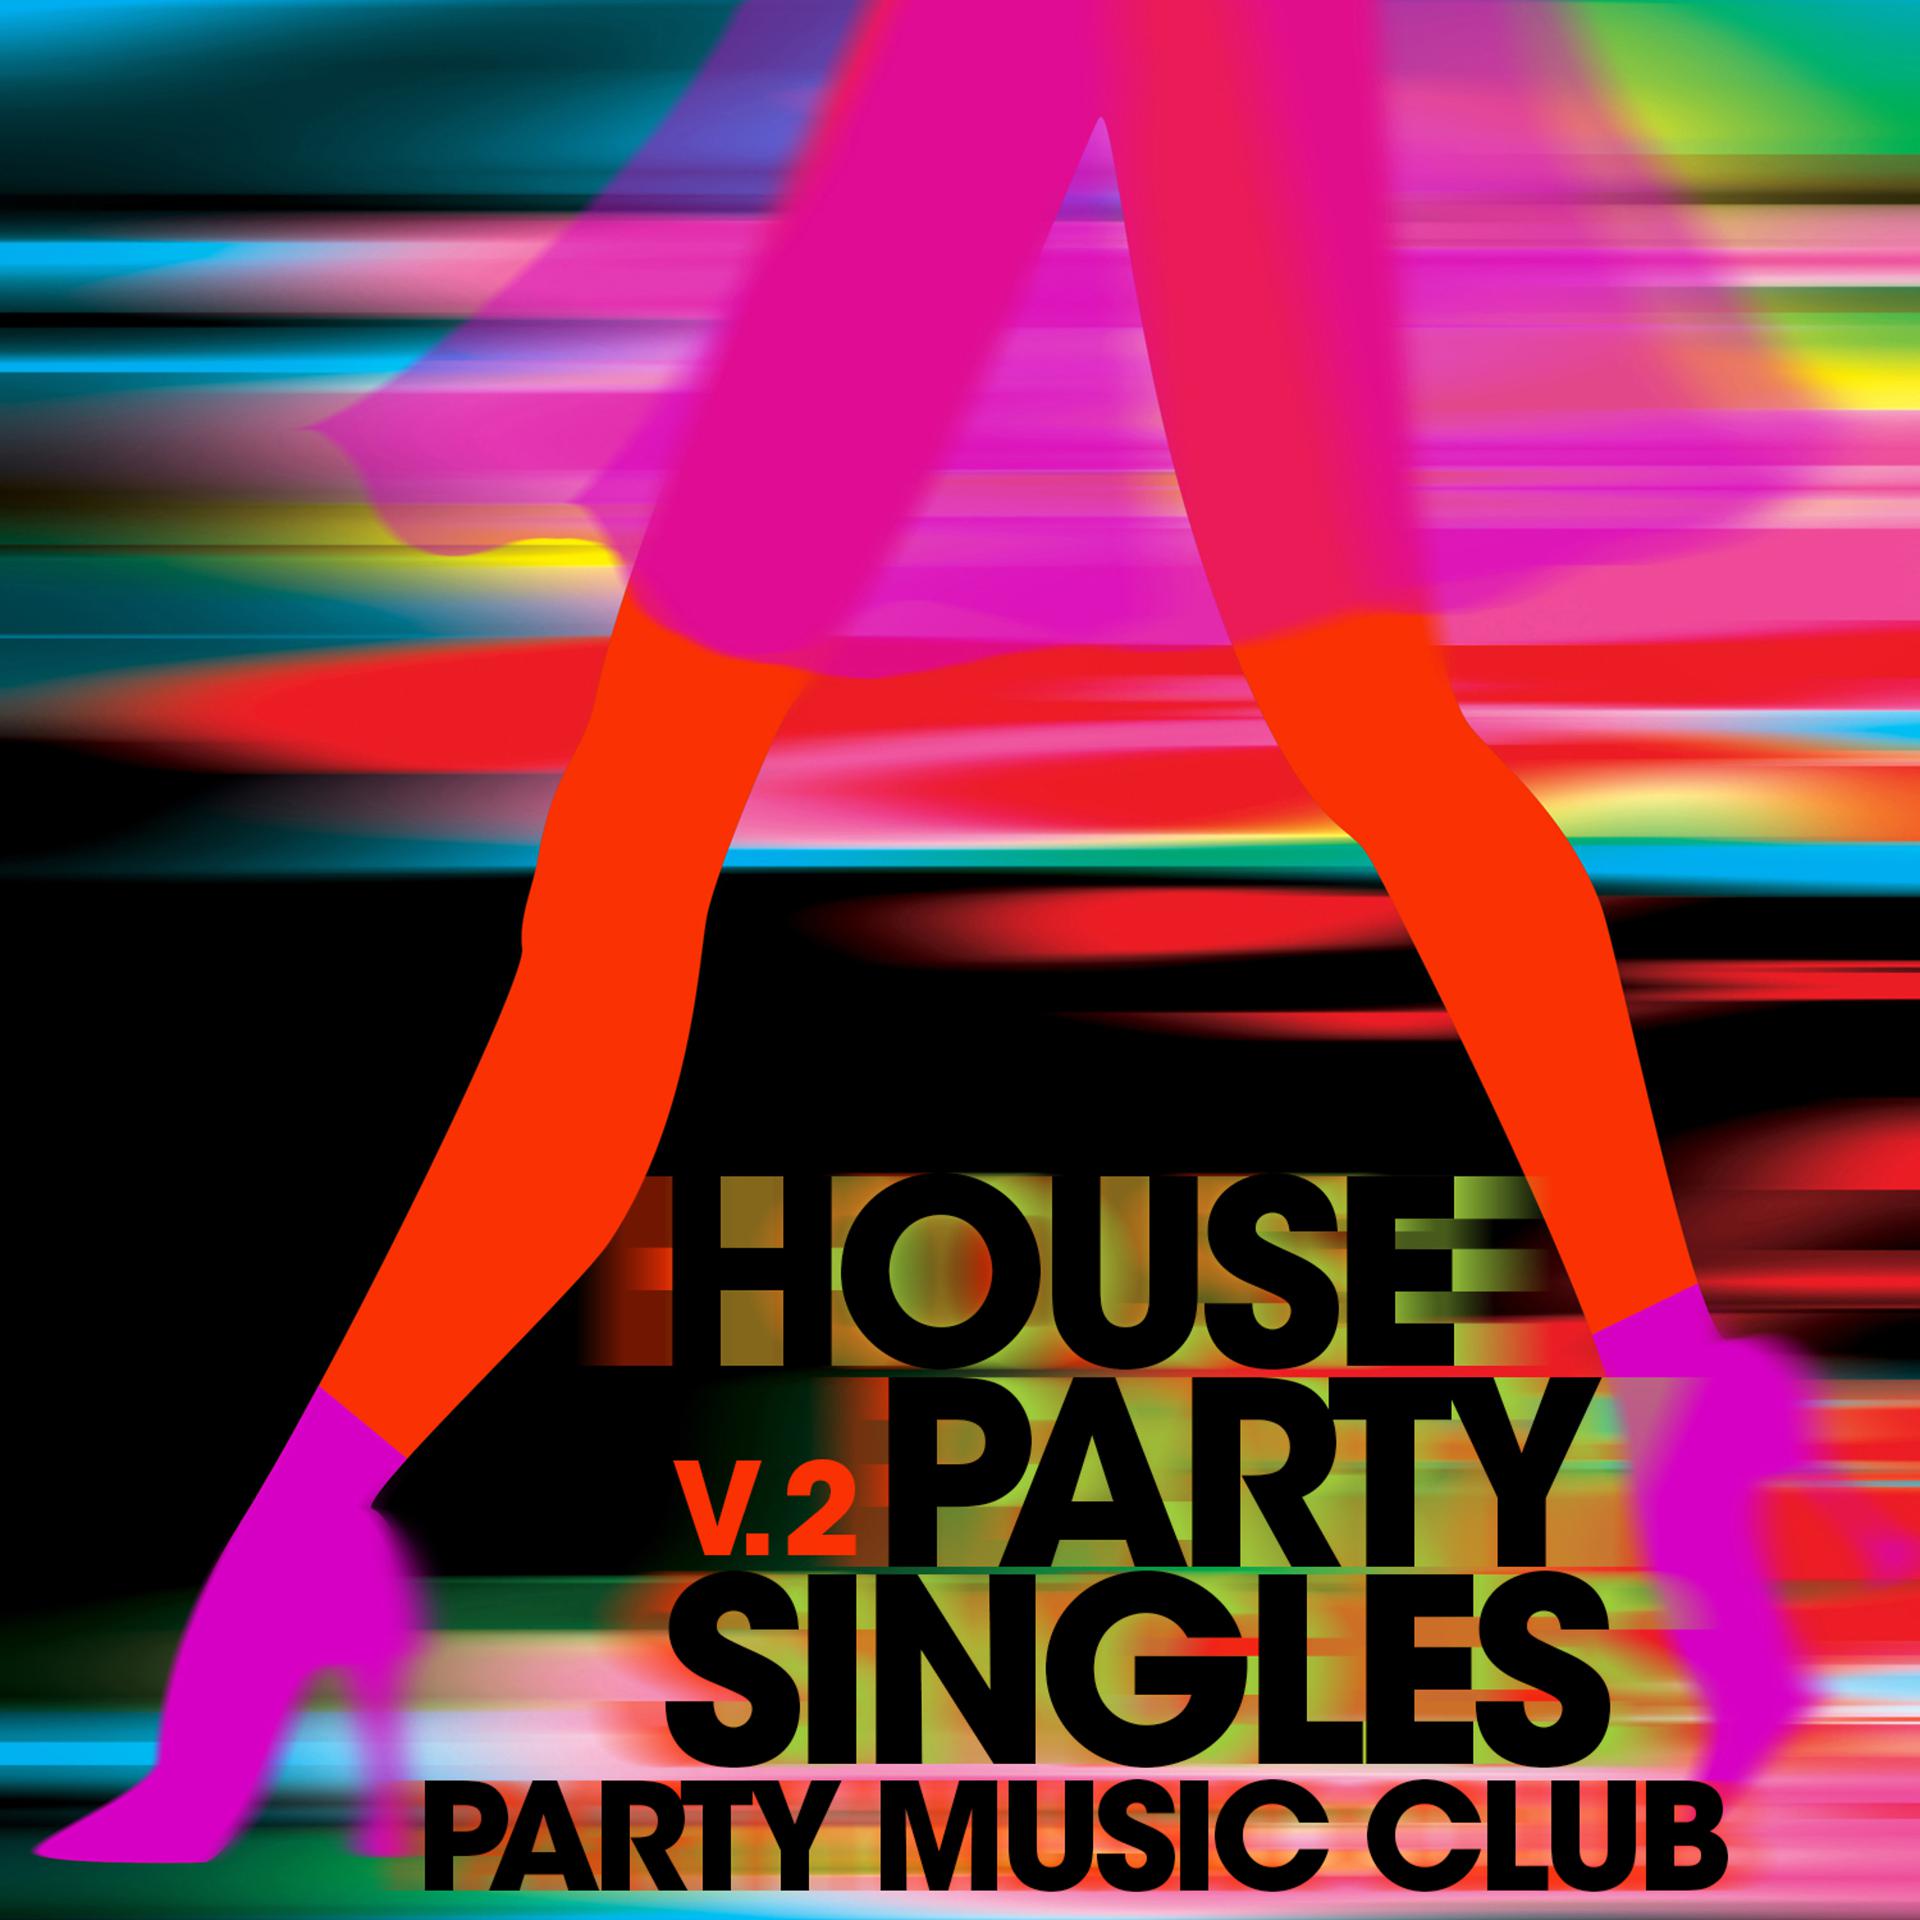 Singles альбом. House Party музыка. Club Music. Under Party альбом. Singles Party Shakespeare.